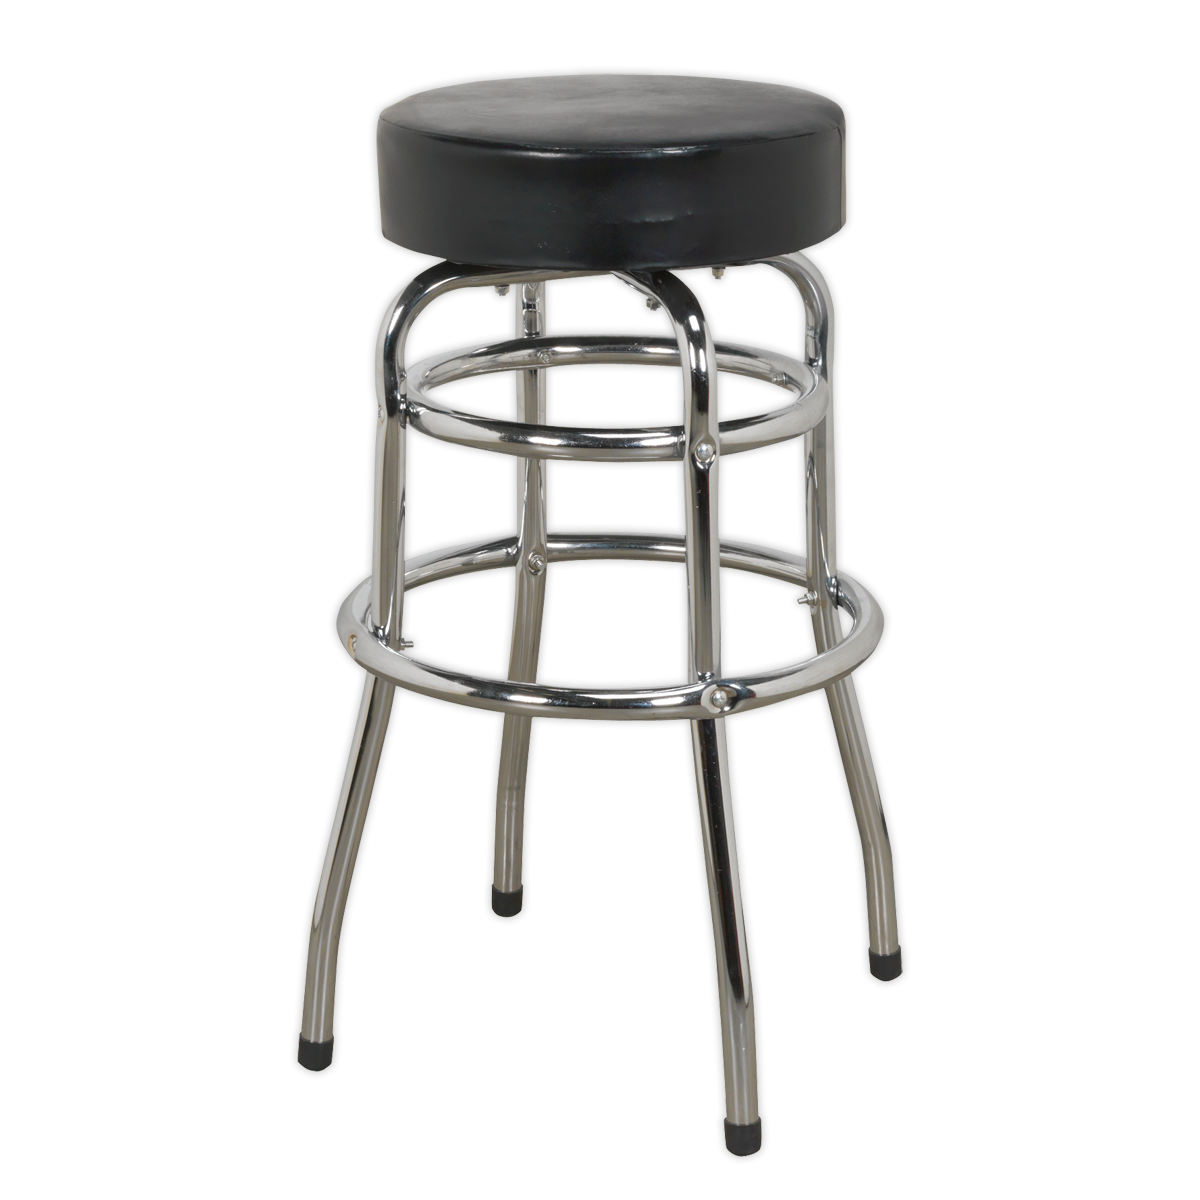 Workshop Stool with Swivel Seat - SCR13 - Farming Parts